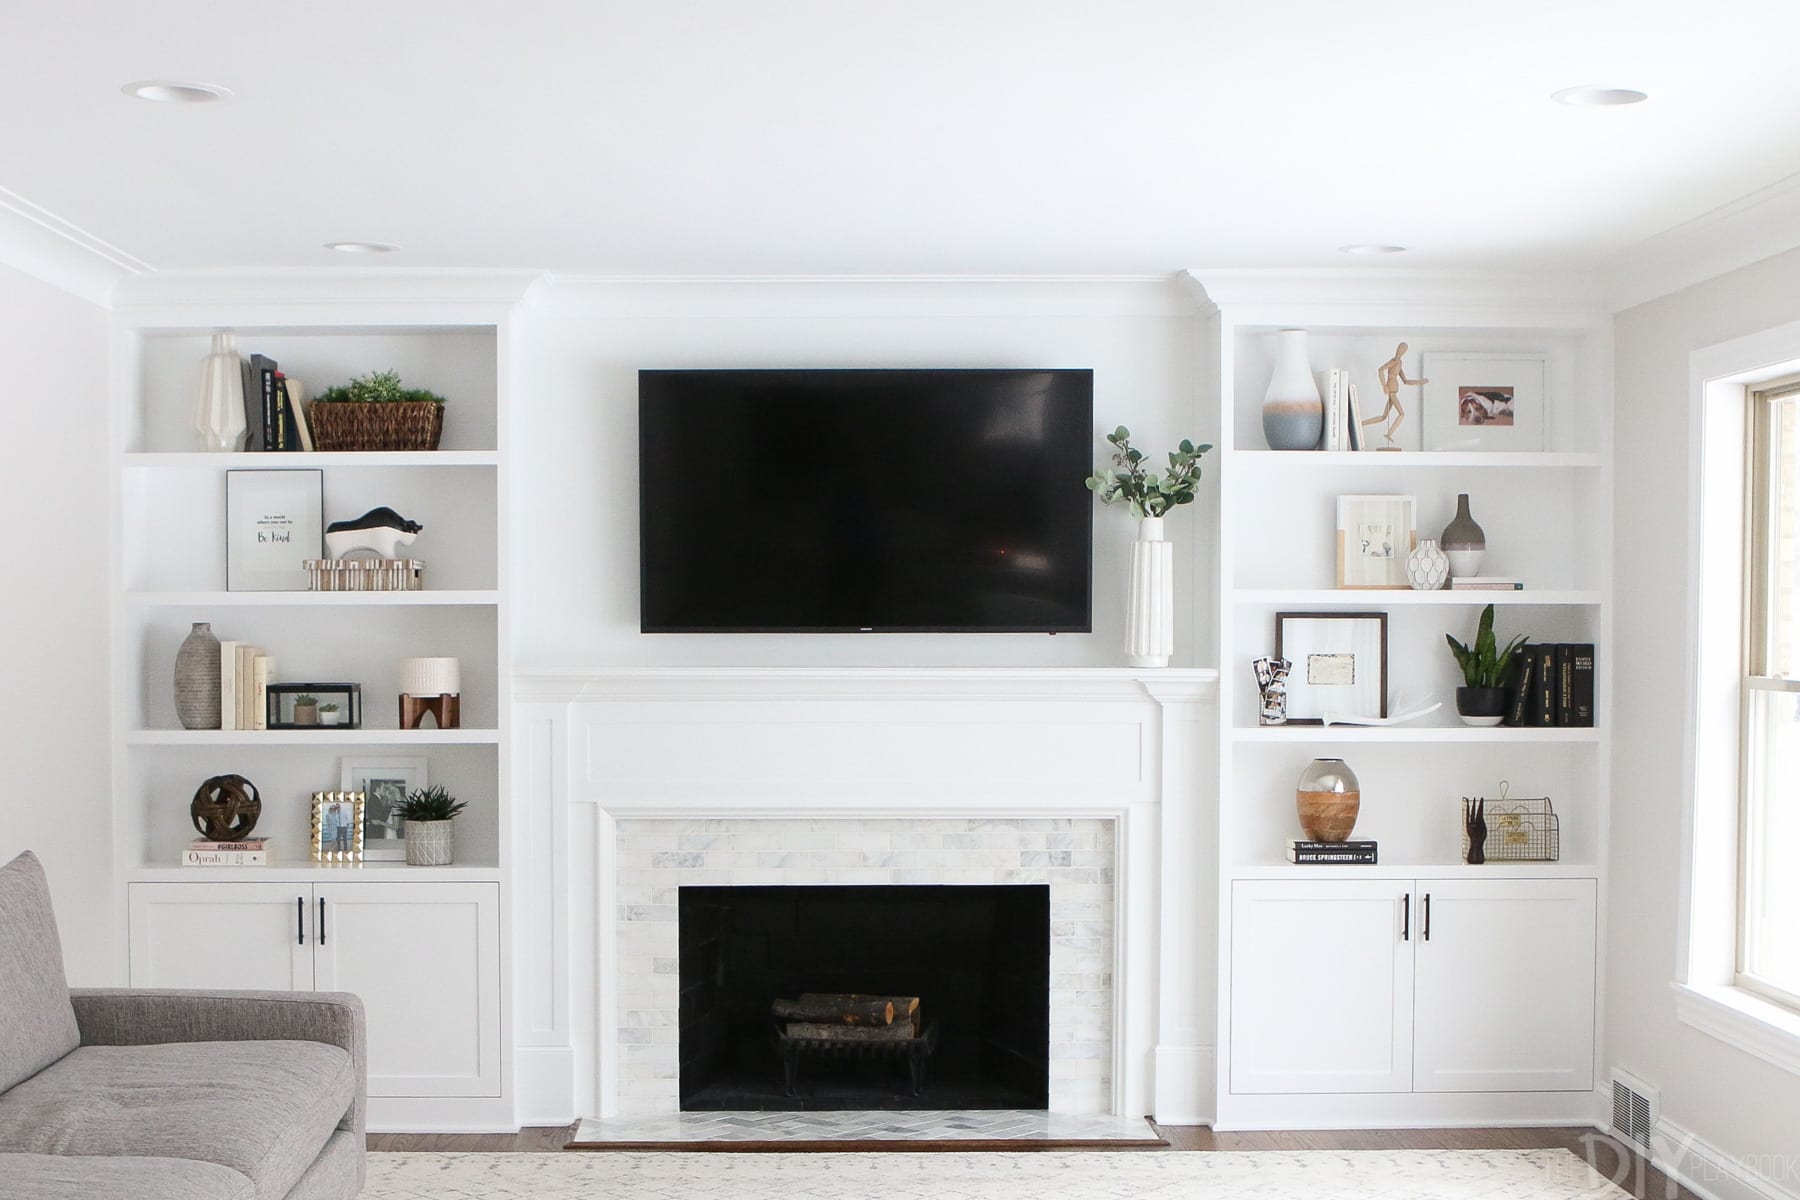 the dos and don'ts of decorating built-in shelves | the diy playbook